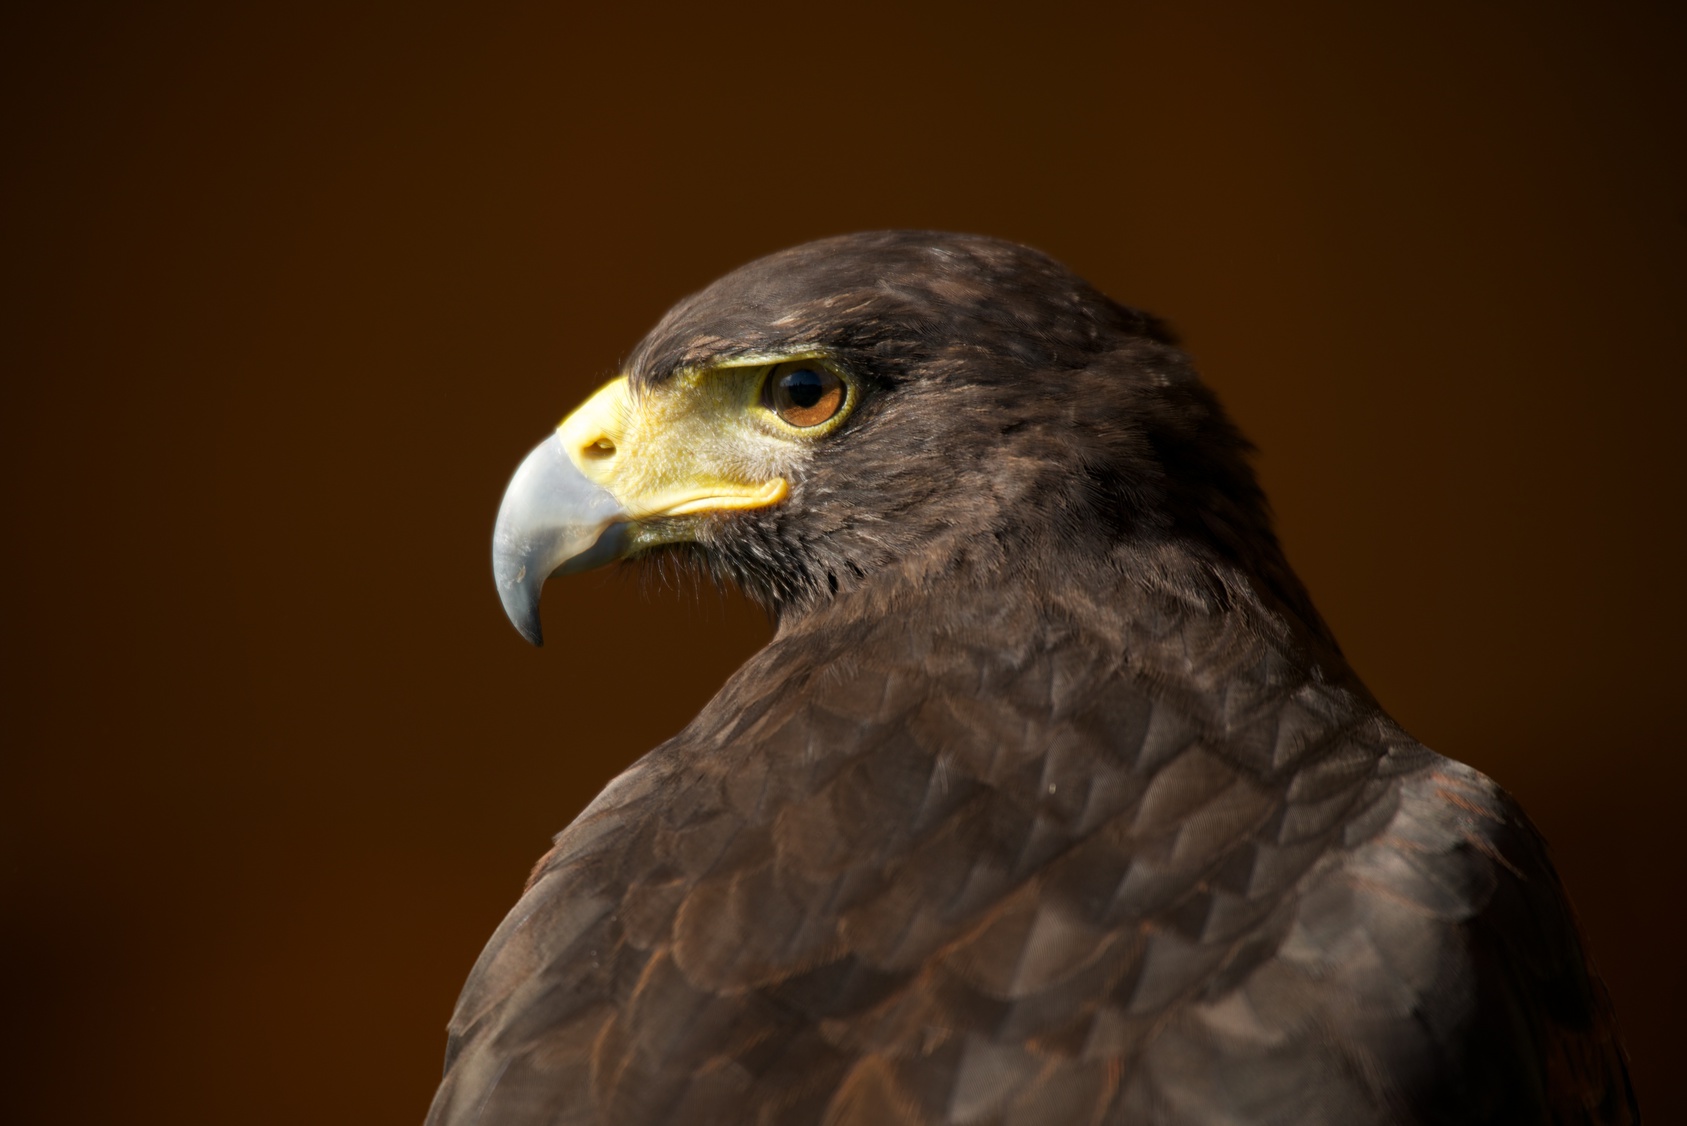 http://www.townandcountryfalconry.co.uk/wp-content/uploads/2016/12/Fotolia_71555907_Subscription_Monthly_M.jpg